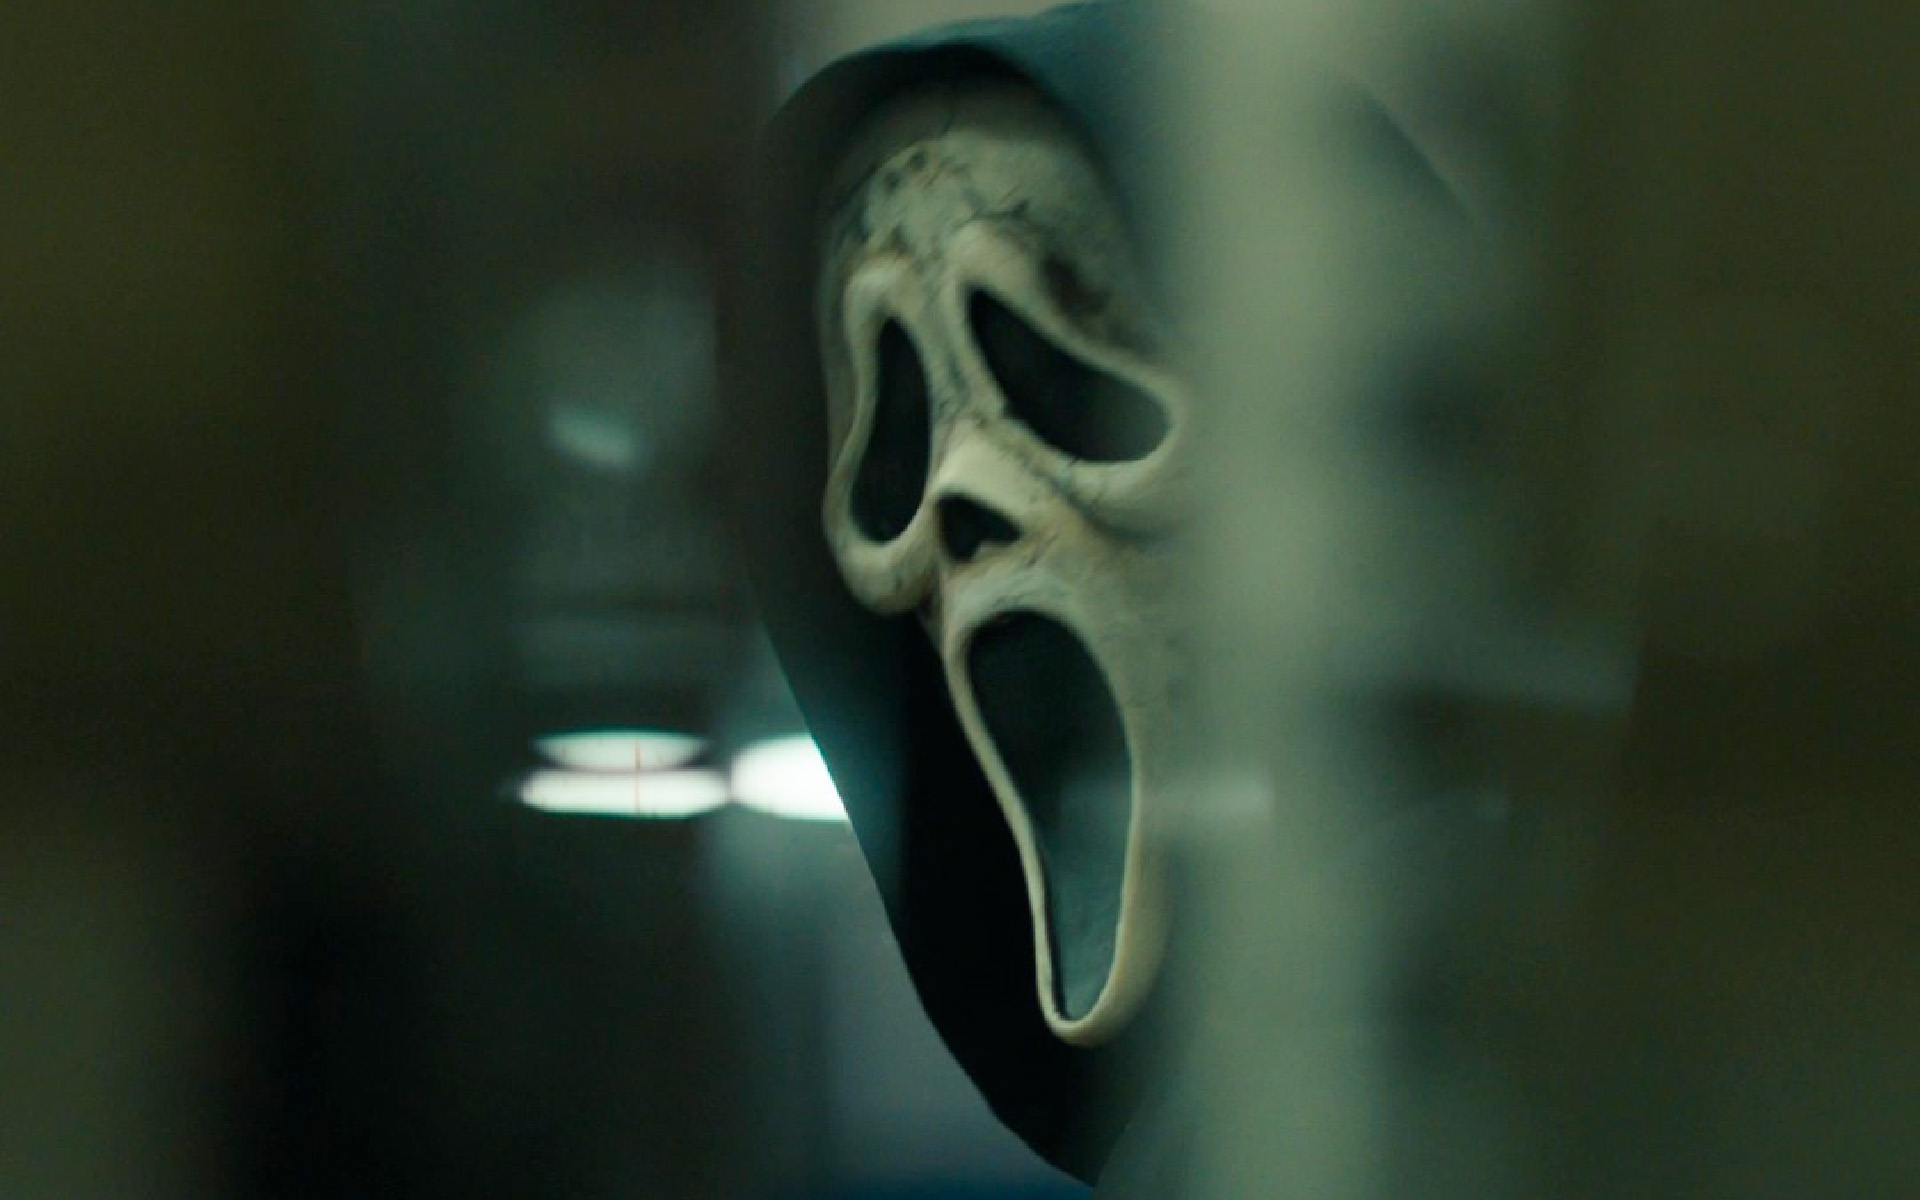 A blurry close-up image of Ghostface’s mask from Scream 6